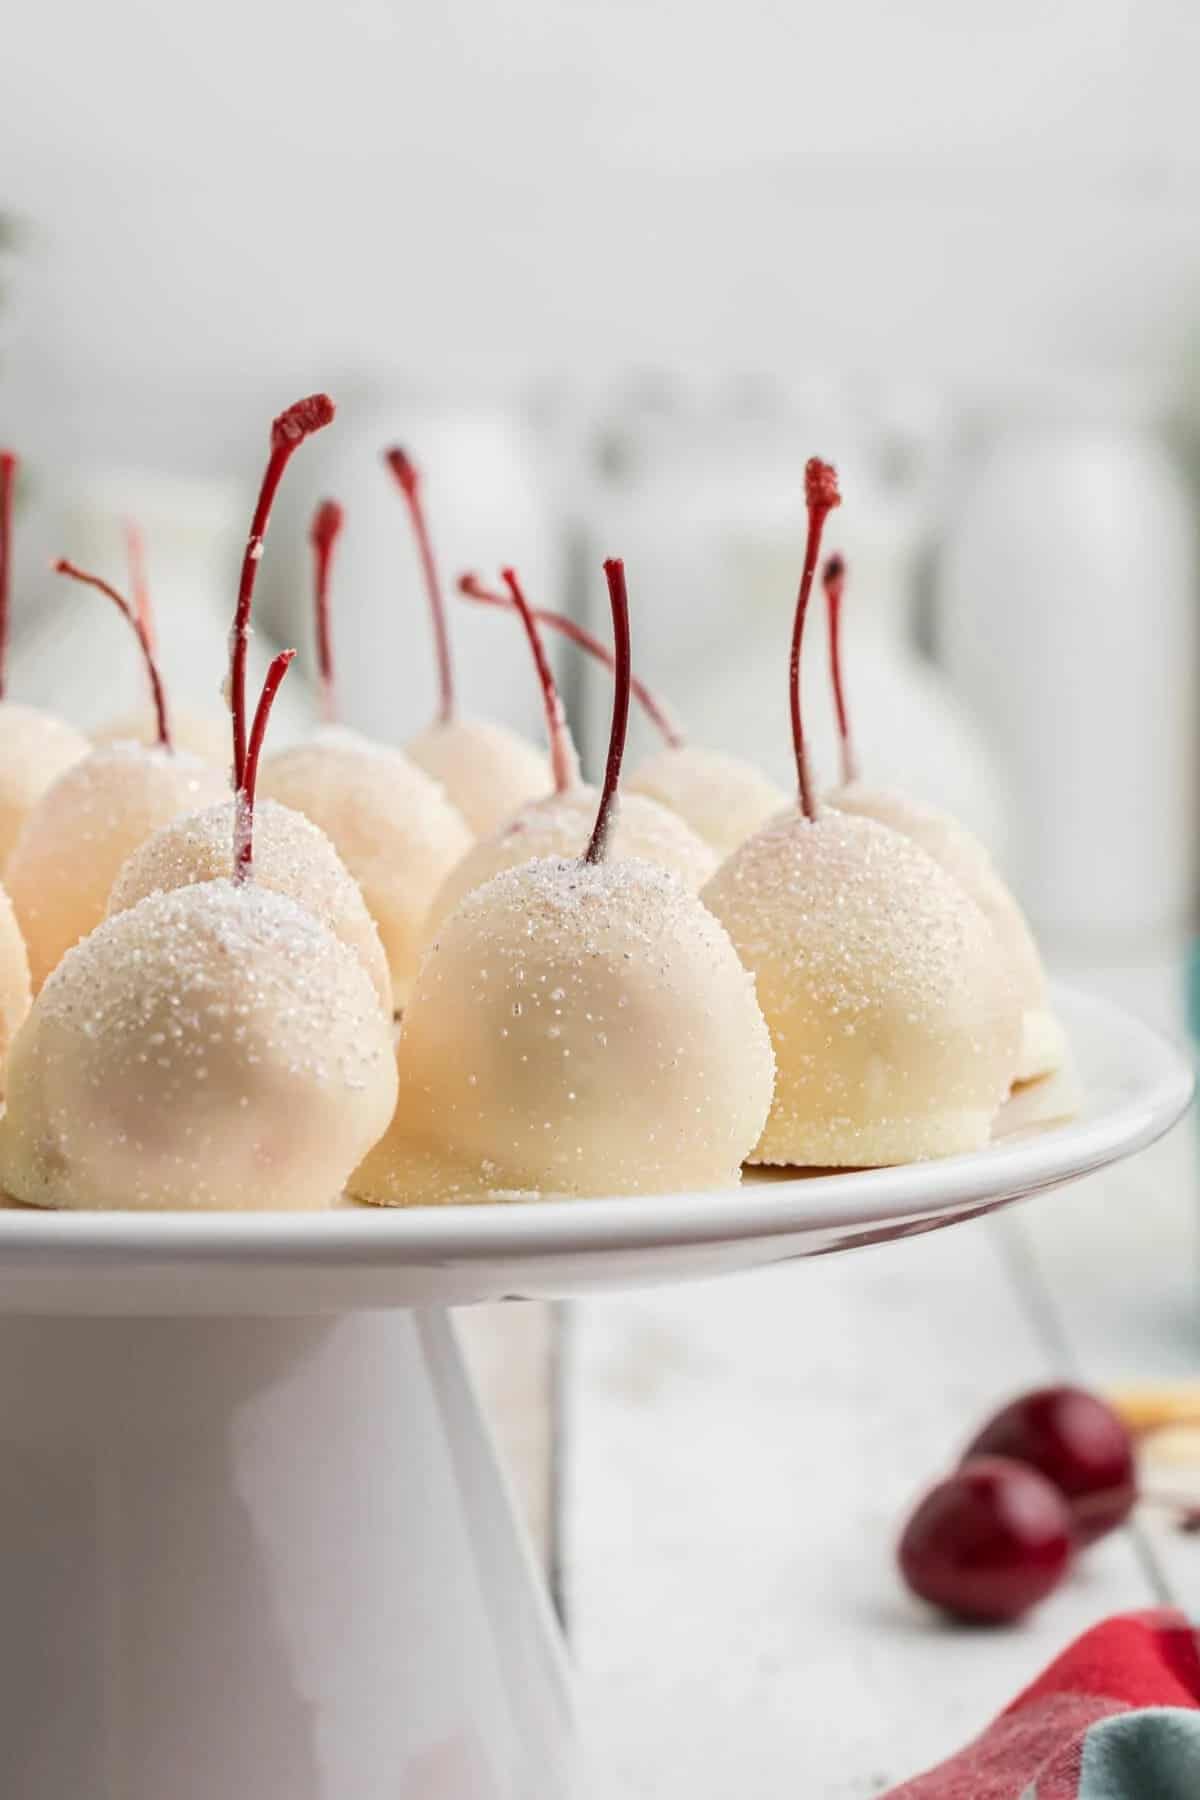 White chocolate covered cherries on a platter.